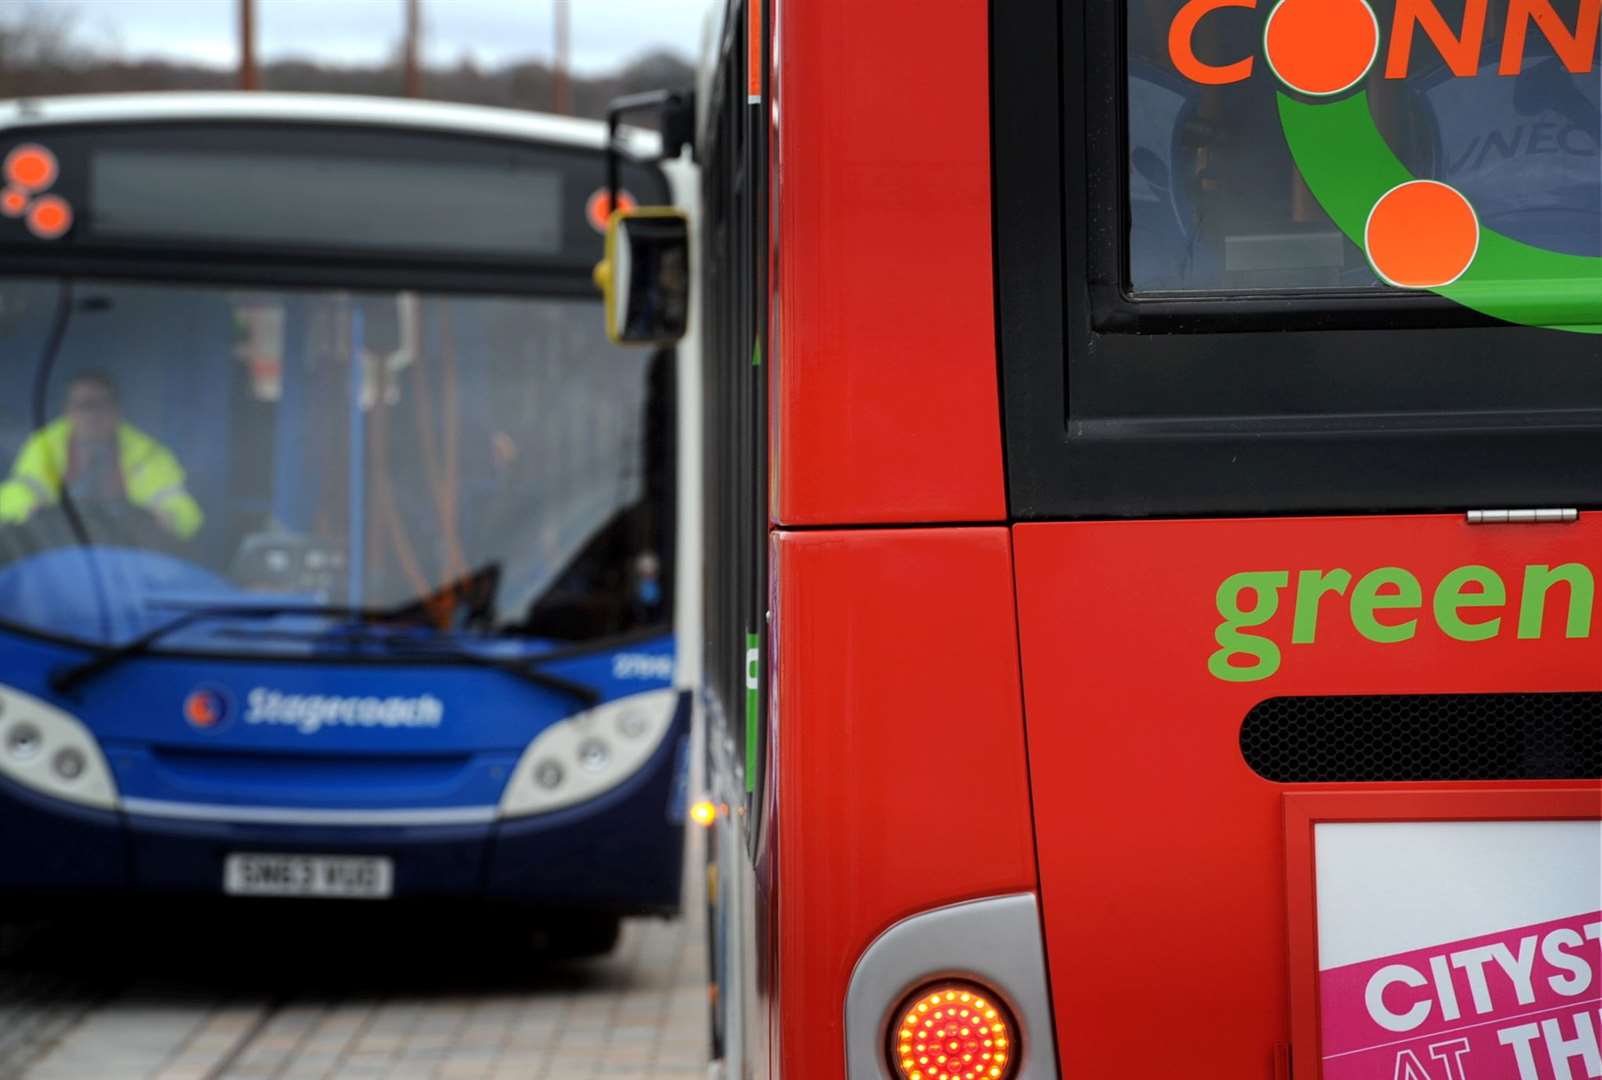 Gordon MP Richard Thomson has welcomed figures showing the success of the Scottish Government’s concessionary bus travel but has warned about cuts to services.